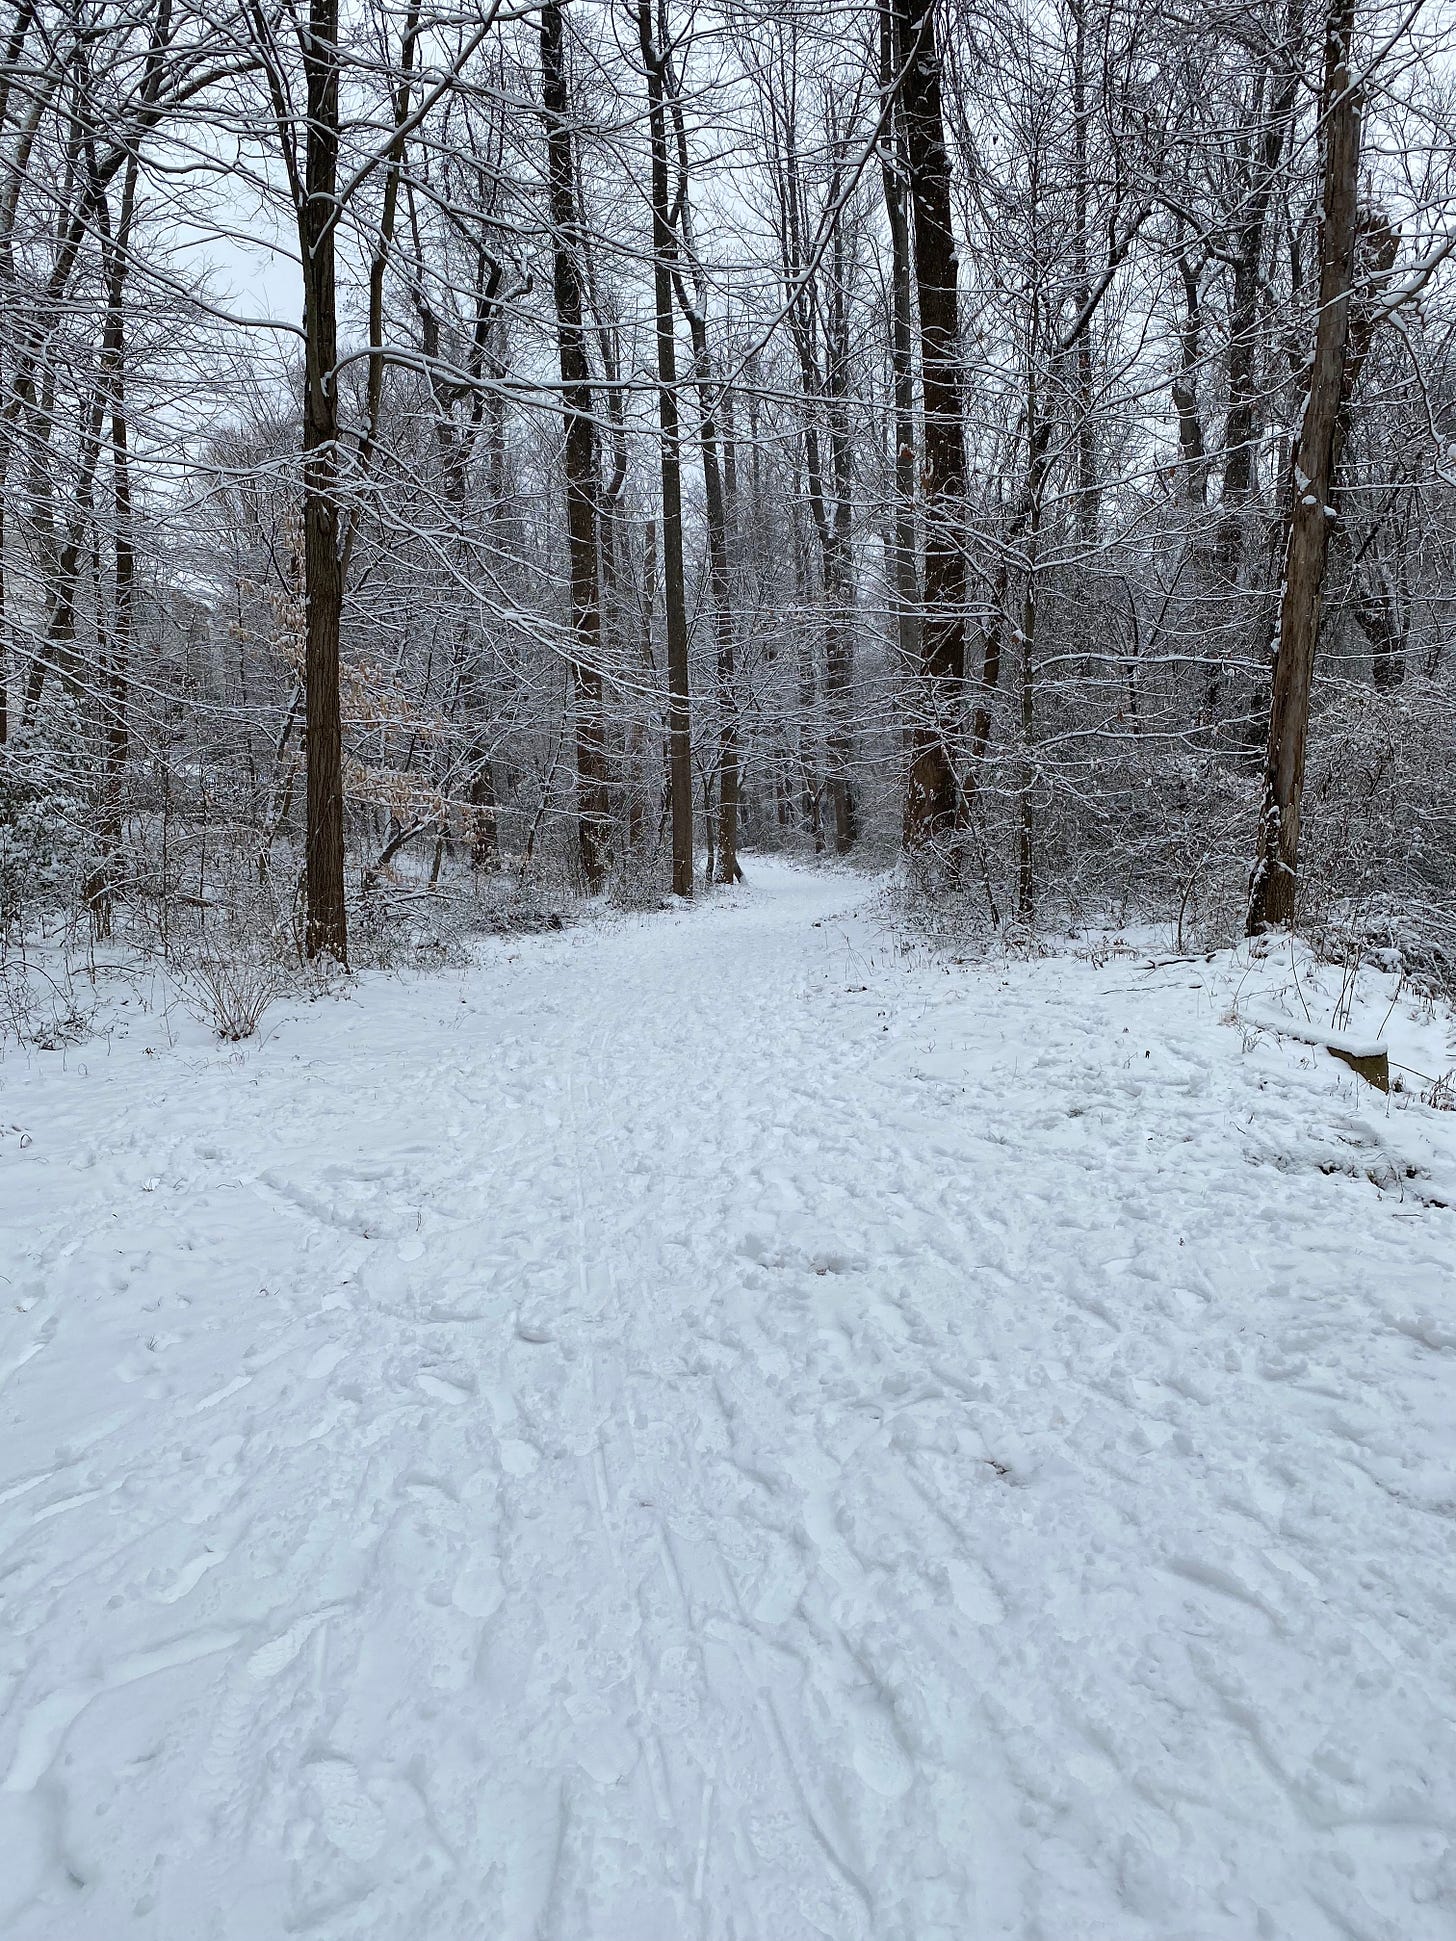 stretch of hiking trail covered with snow, surrounded by trees, no people in sight